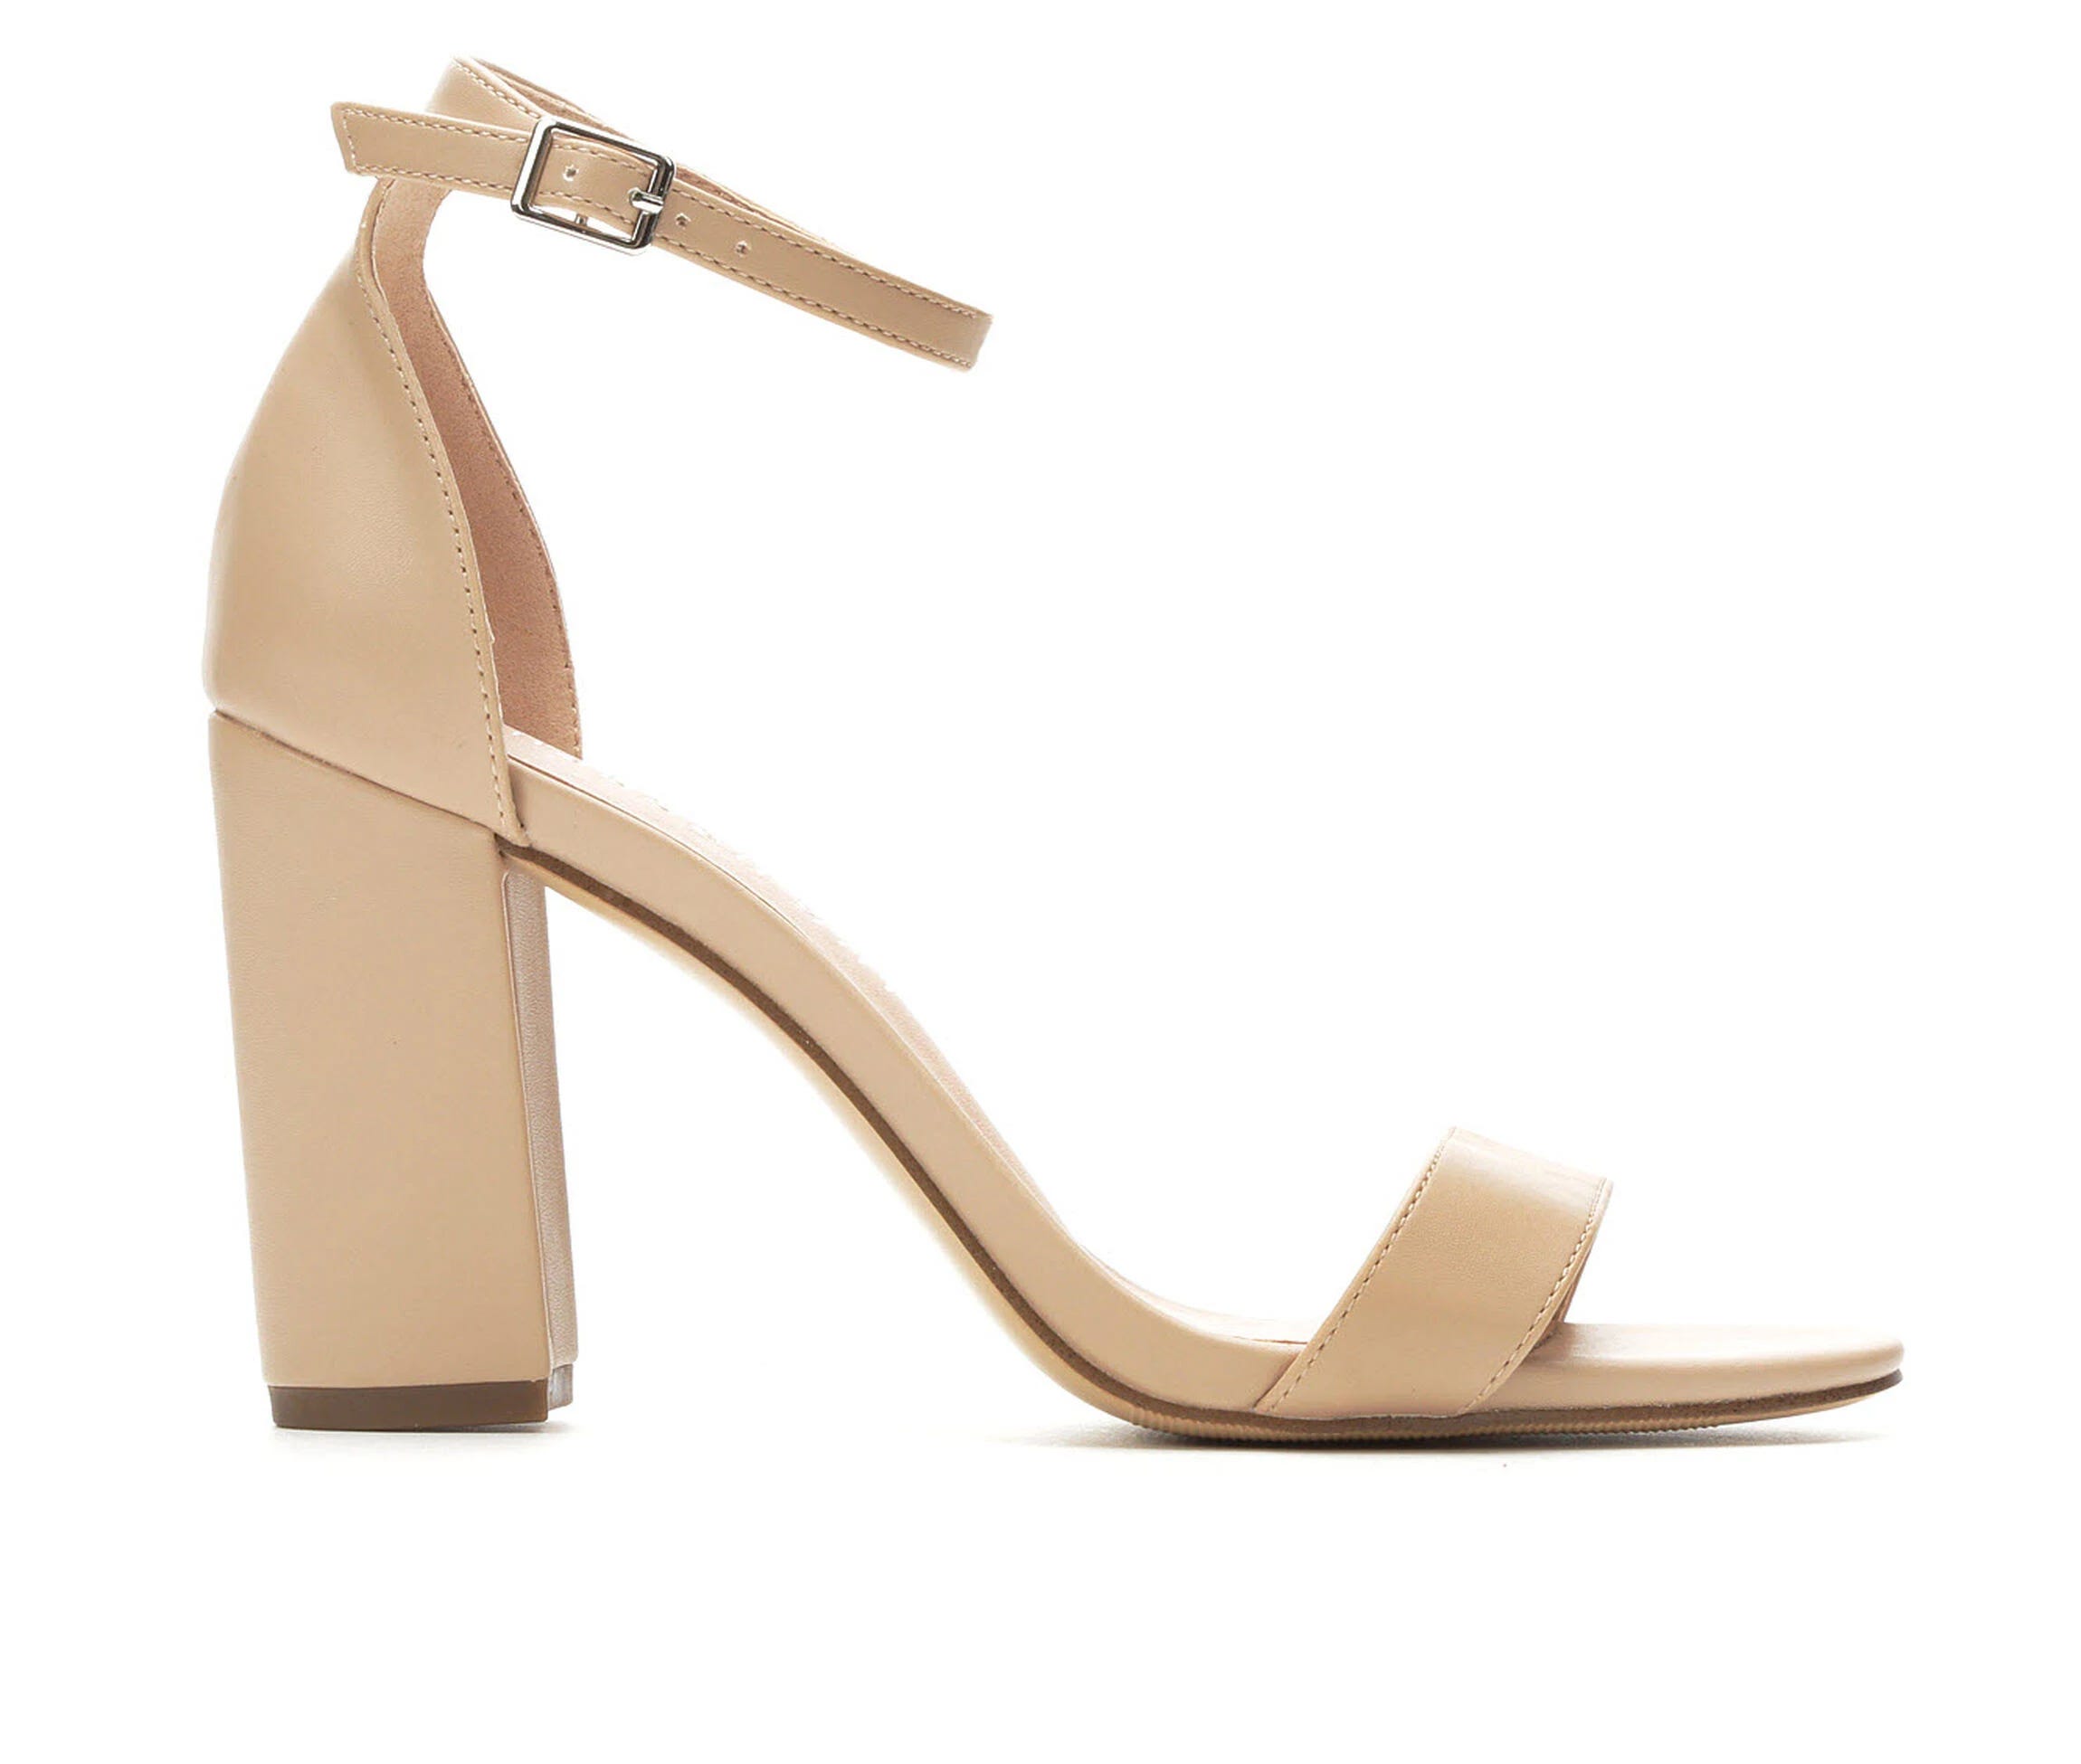 Strappy Faux-Leather High Heel Sandals with Padded Insole | Image